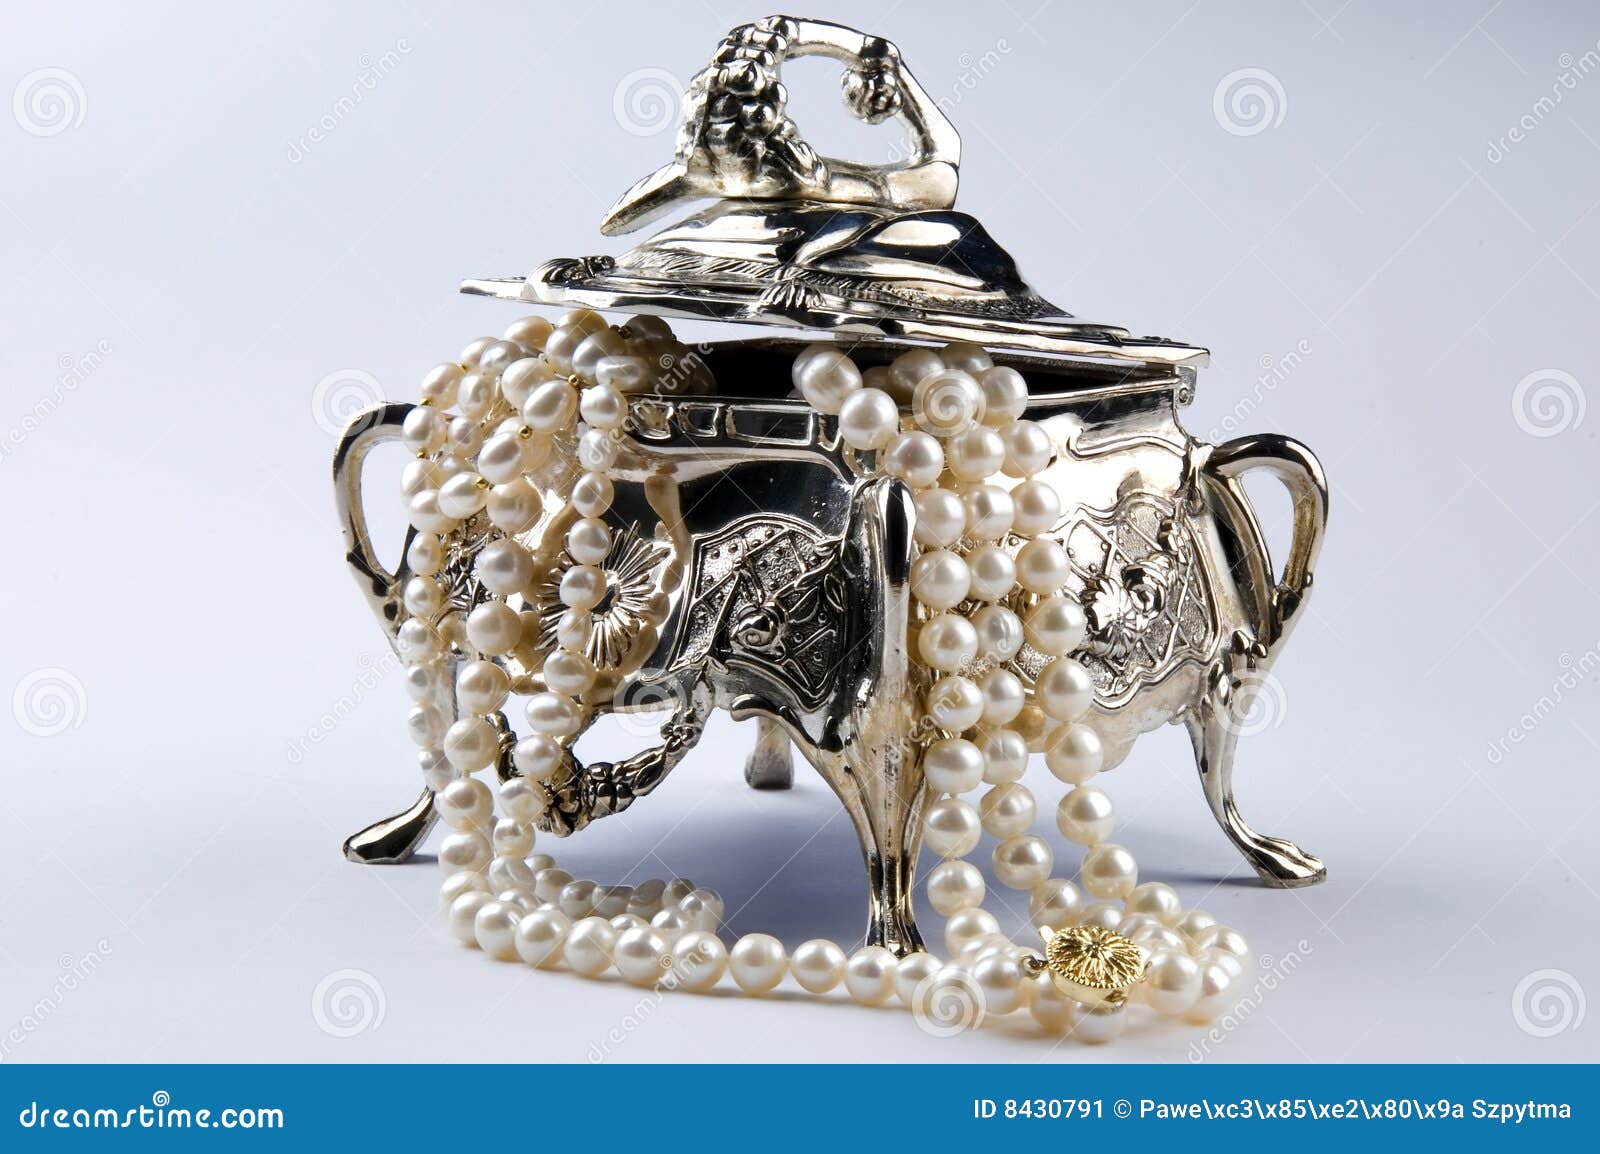 silver jewelery box with pearls